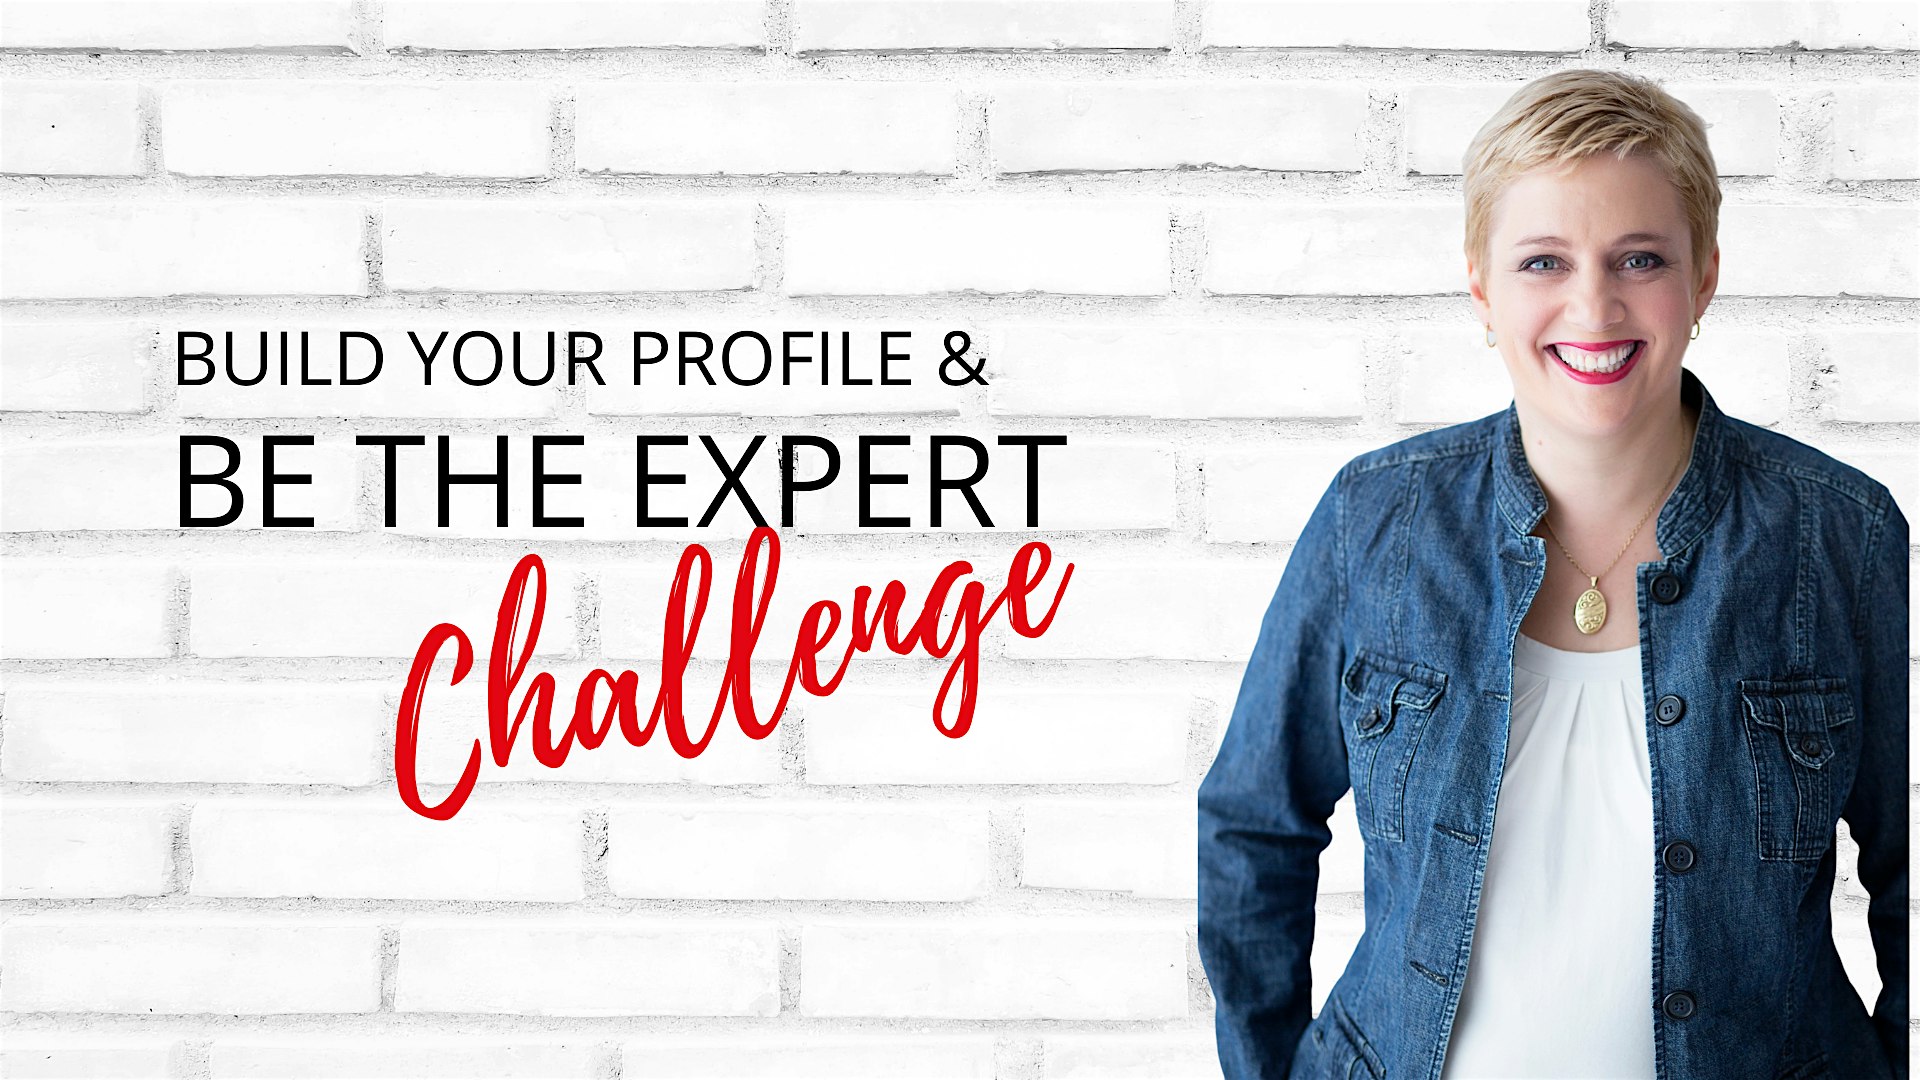 Build Your Profile and Be the Expert 6 Week Challenge October 2022